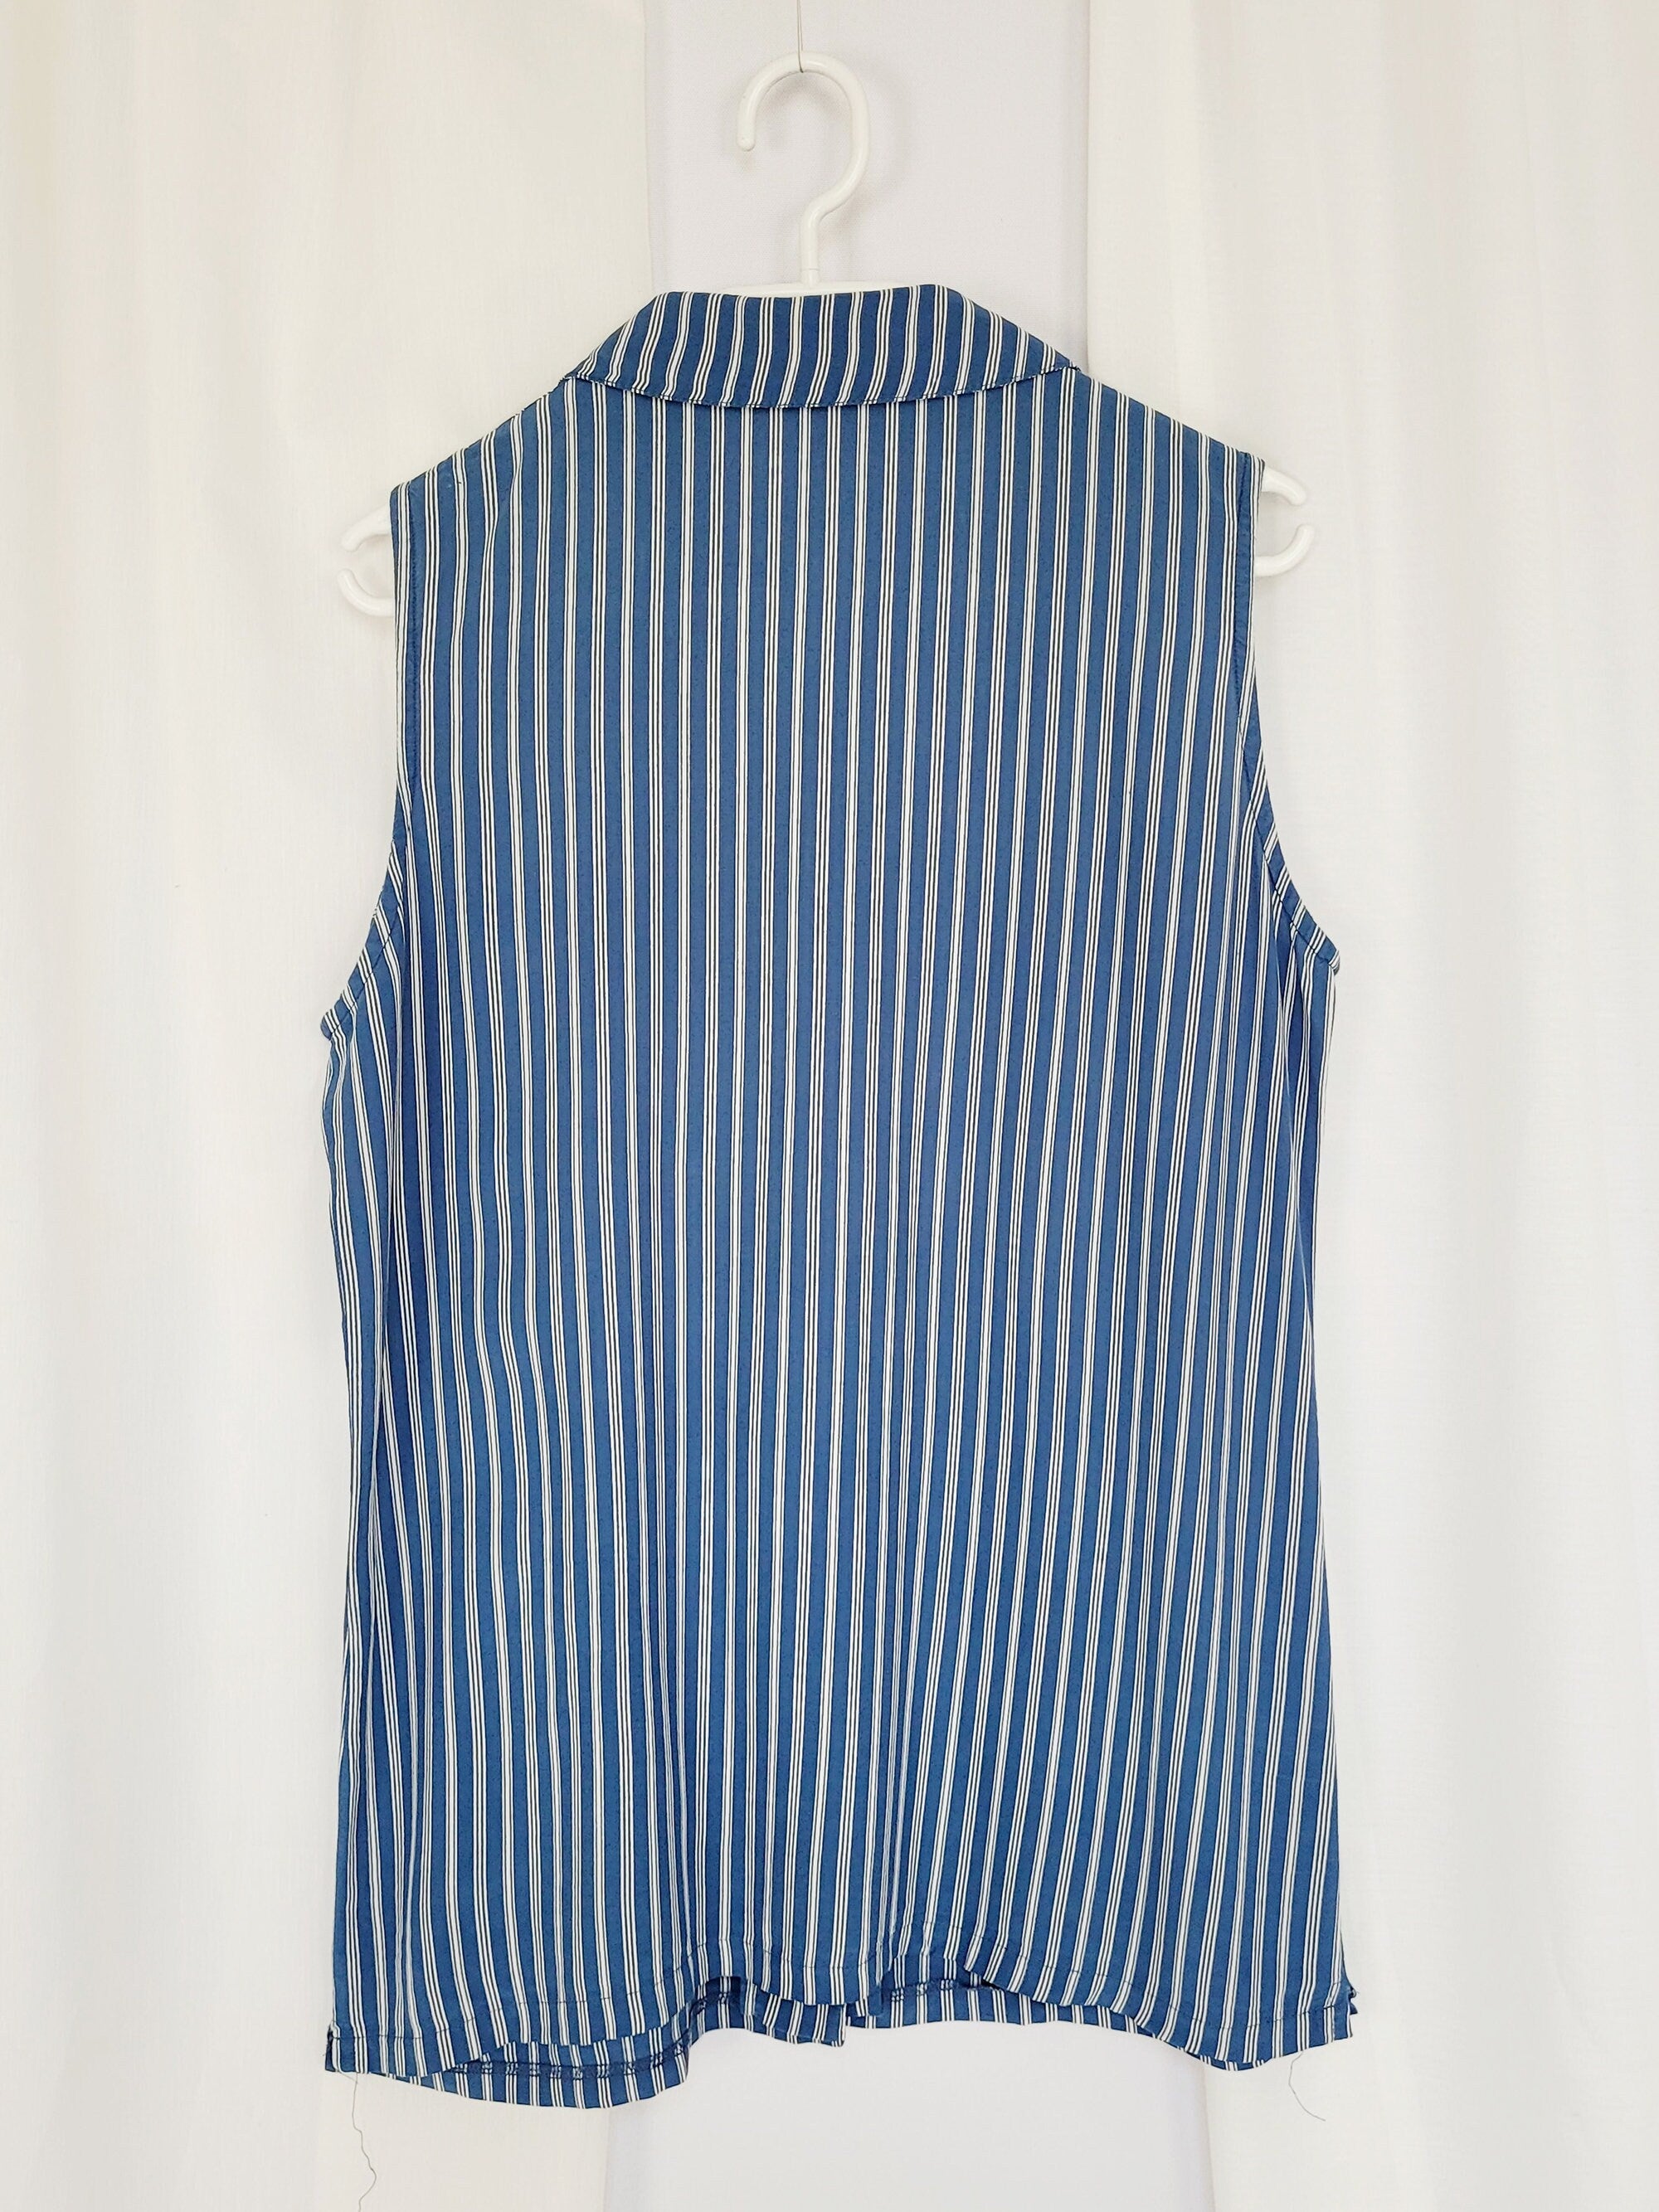 Retro 90s blue stripped sleeveless long smart casual blouse